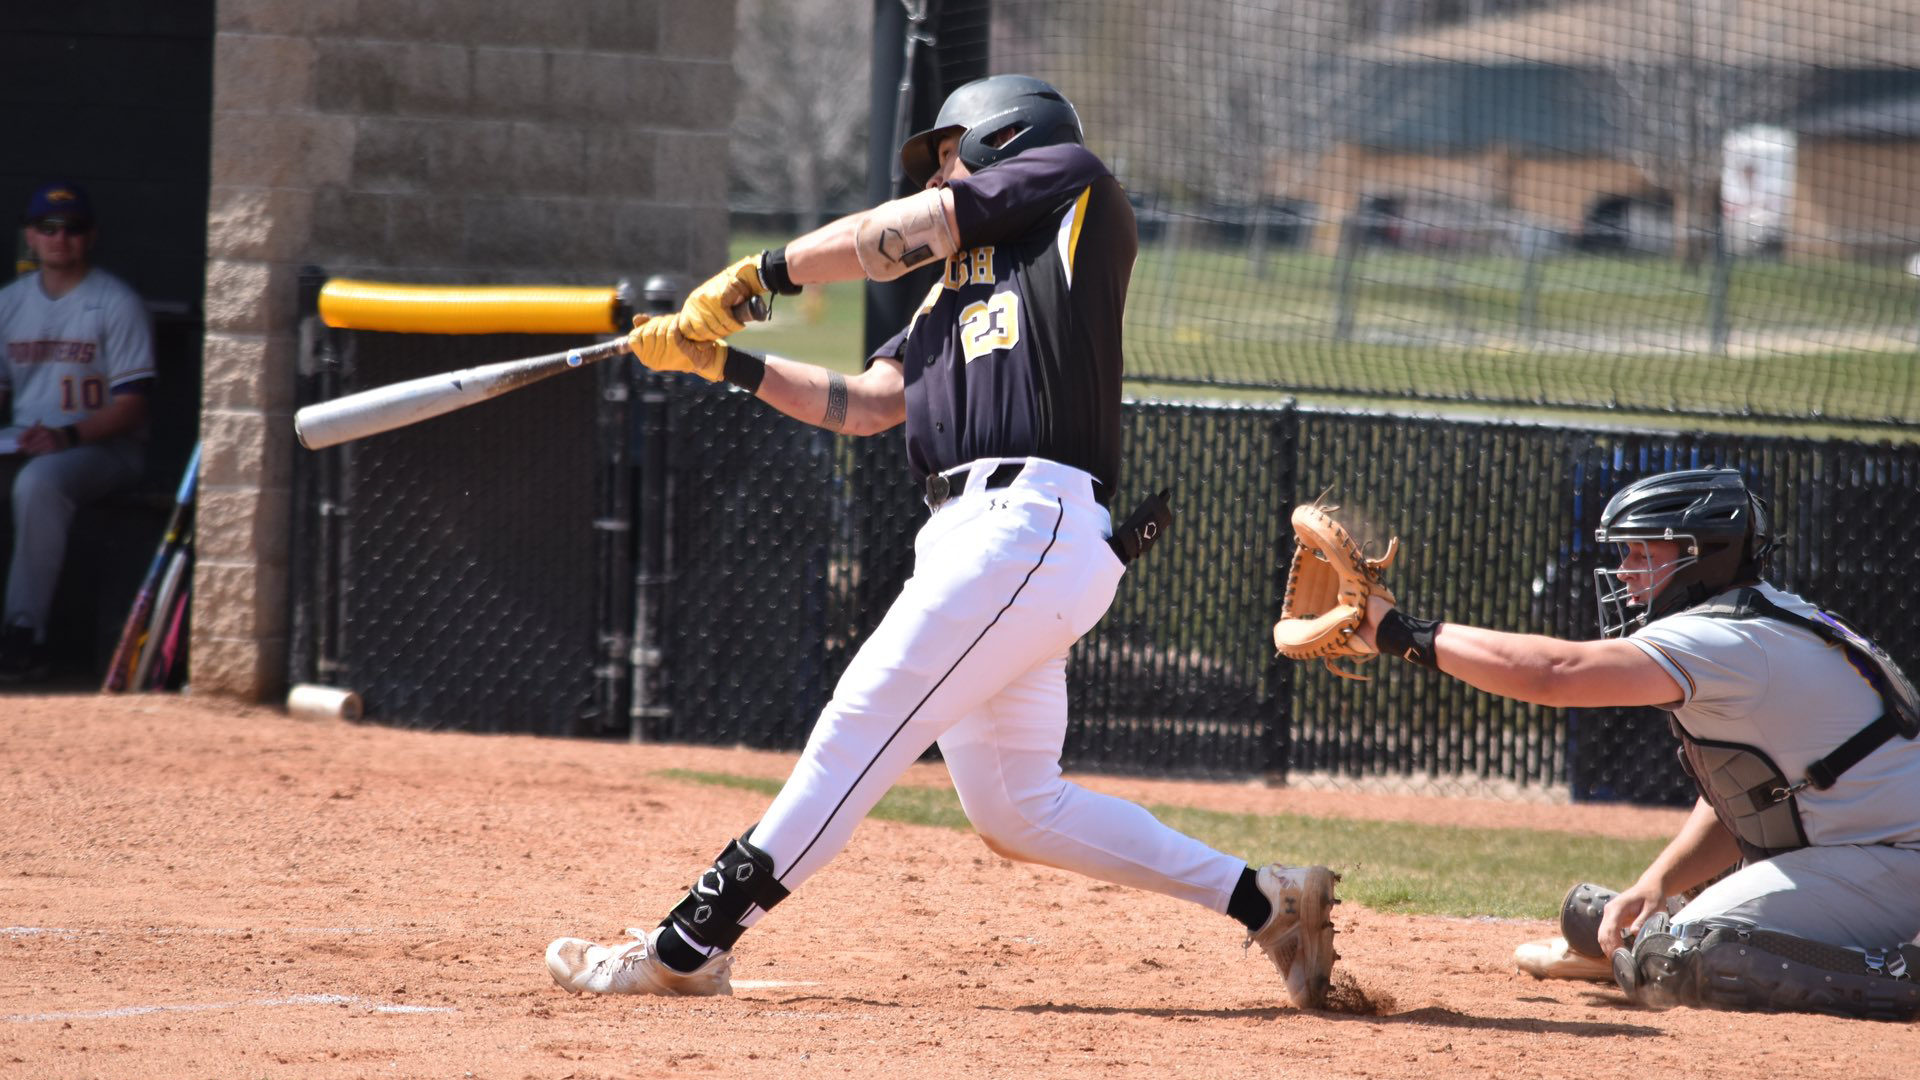 Nick Shiu went 4-5 with a run, 3 RBIs, a double and a home run against UW-Stevens Point on Wednesday. Photo Credit: Jennifer Zuberbier, UW-Oshkosh Athletics